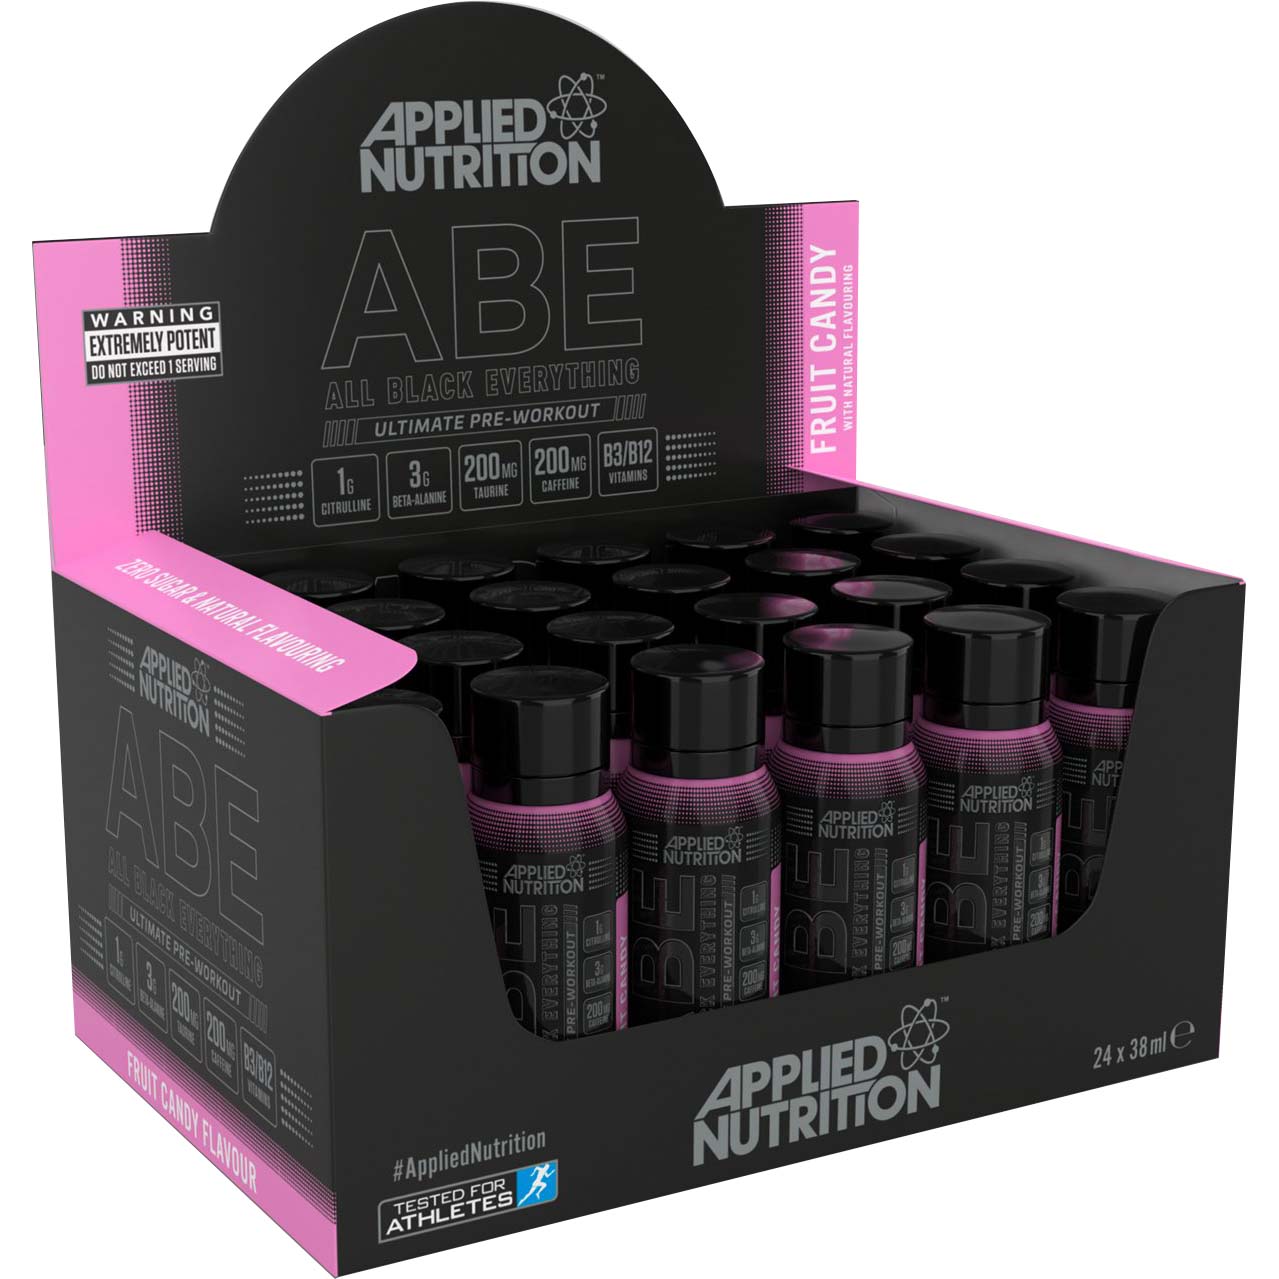 Applied Nutrition ABE Ultimate Pre Workout Shot, Fruit Candy, 24 Shots